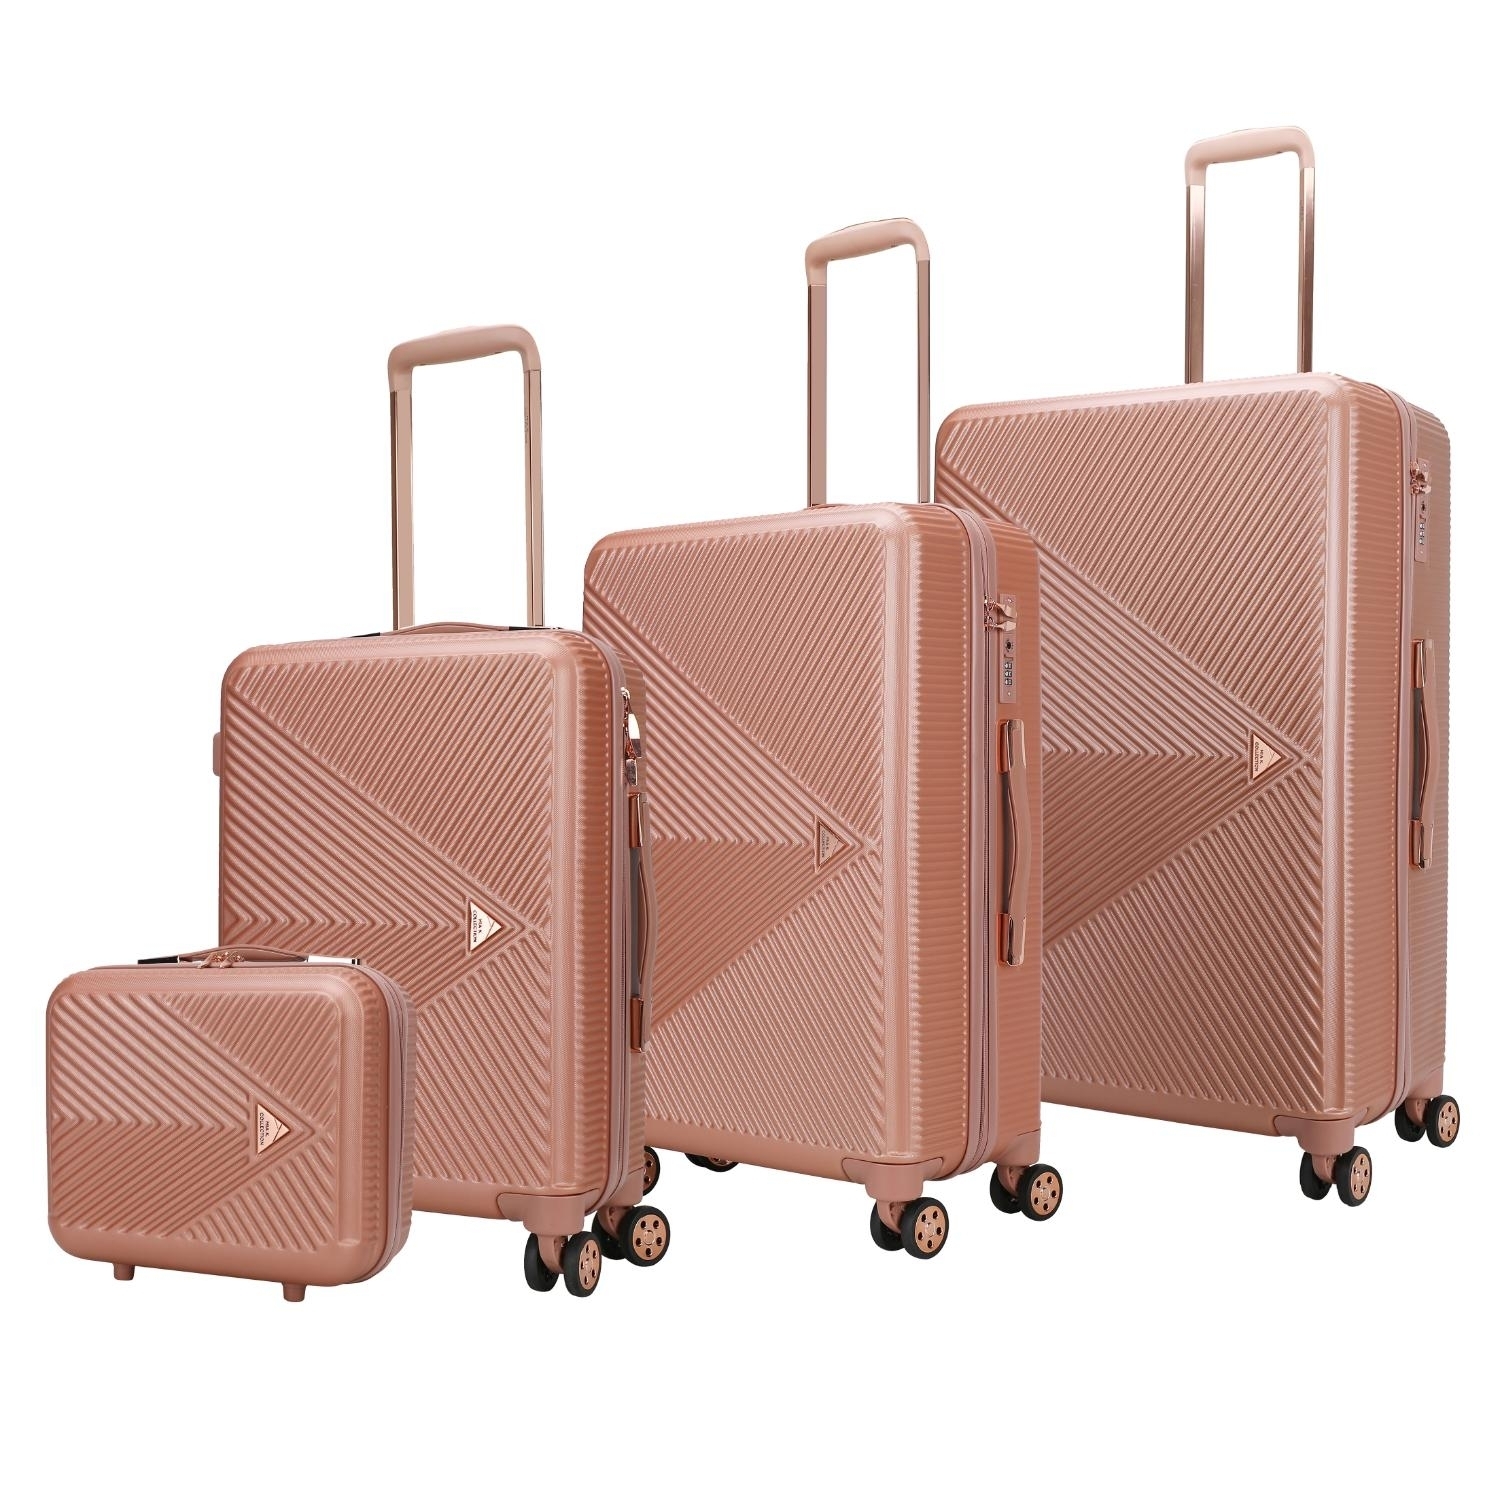 MKF Collection Felicity Luggage Set- 4-piece Set By Mia K - Rose Gold